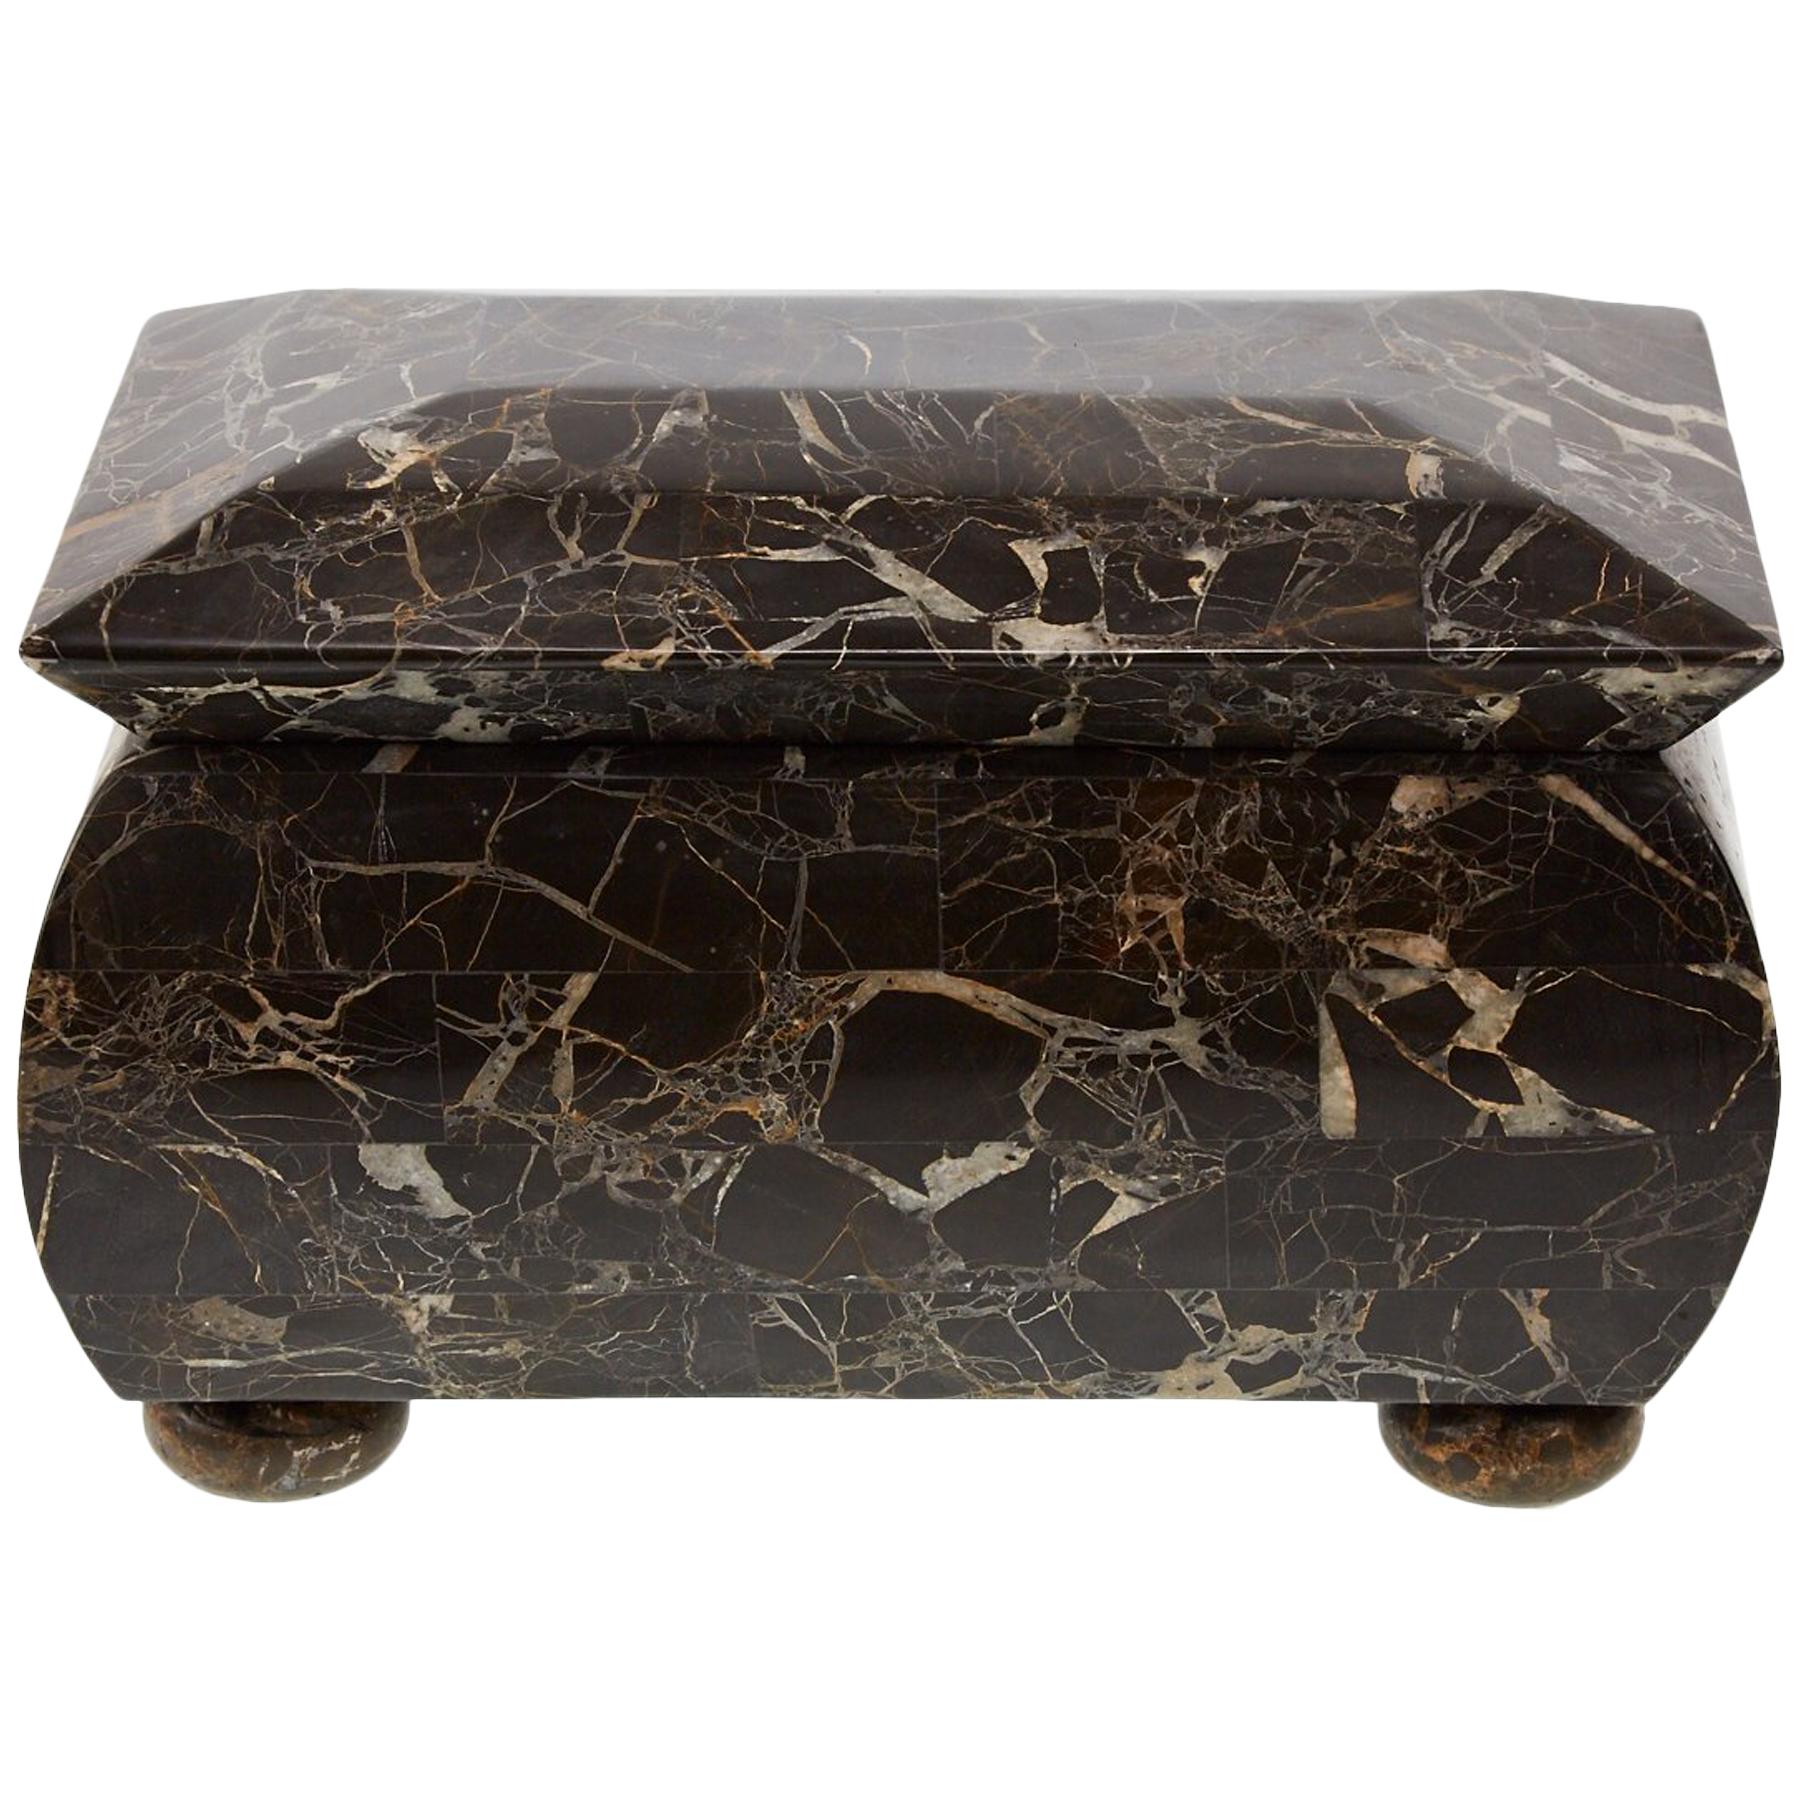 Large "Regency III" Tessellated Snakeskin Stone Tea Caddy or Hinged Box, 1990s For Sale